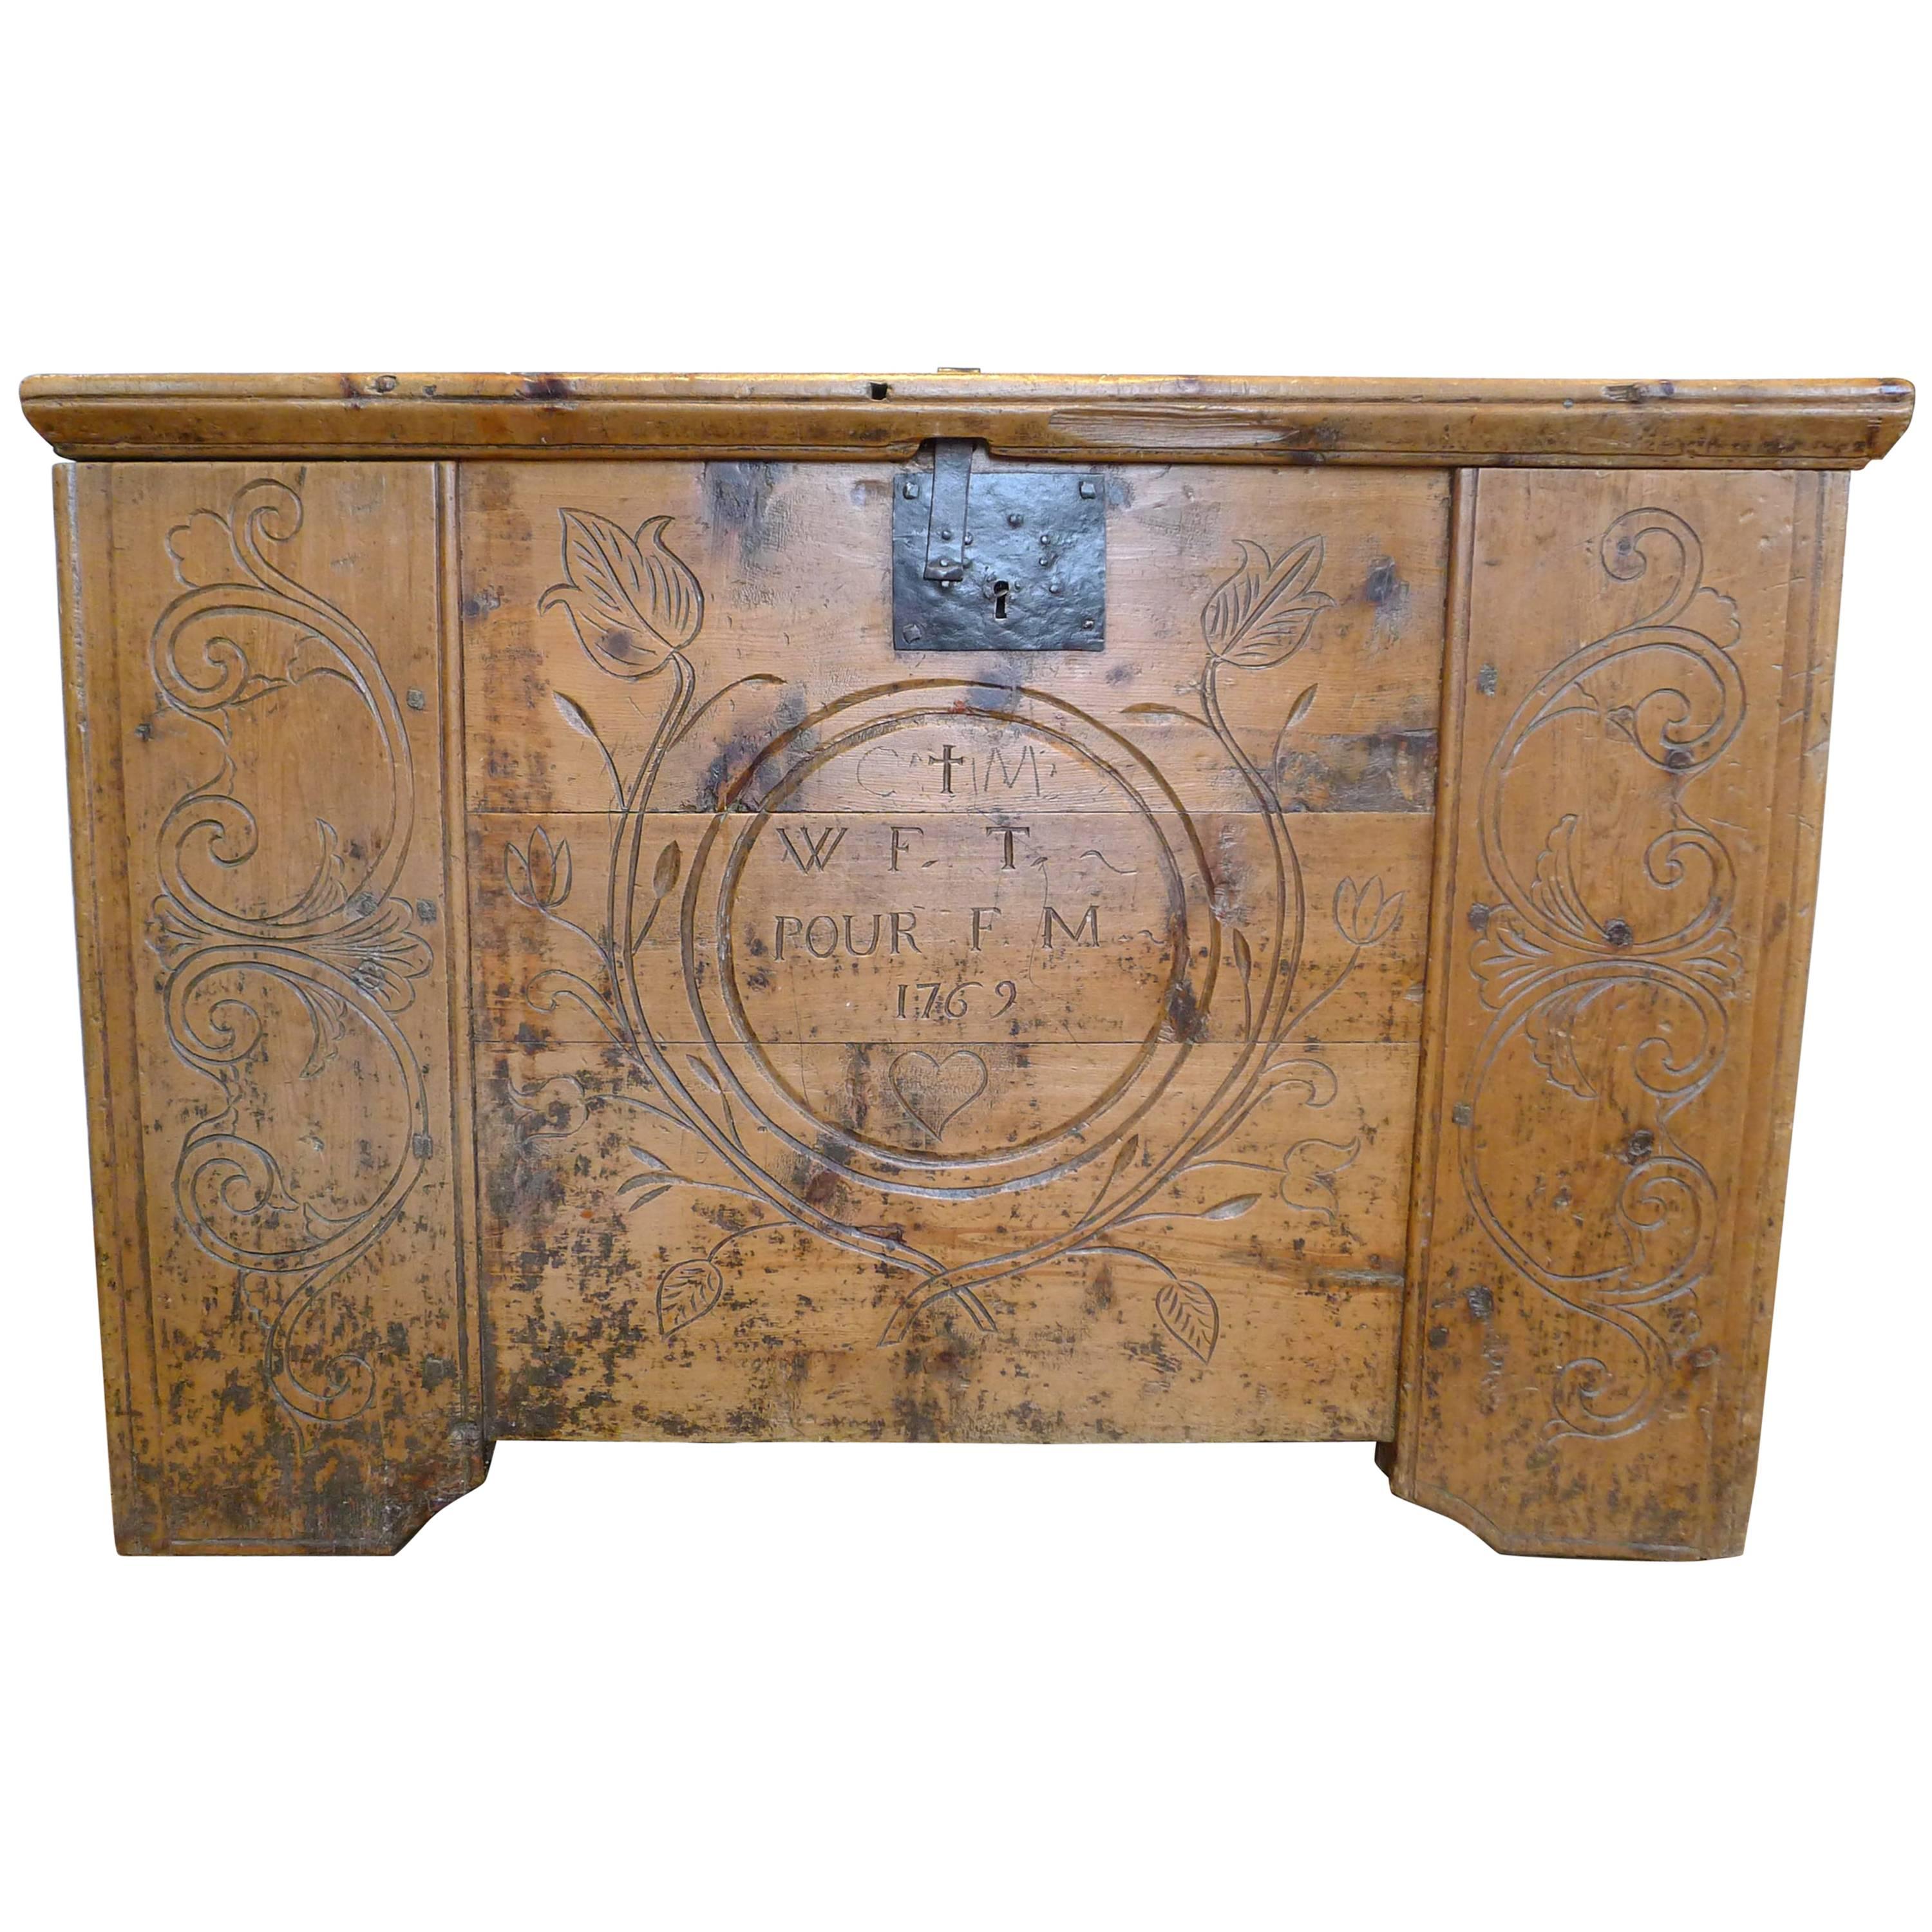 Engraved and Decorated French Chest, 18th Century For Sale